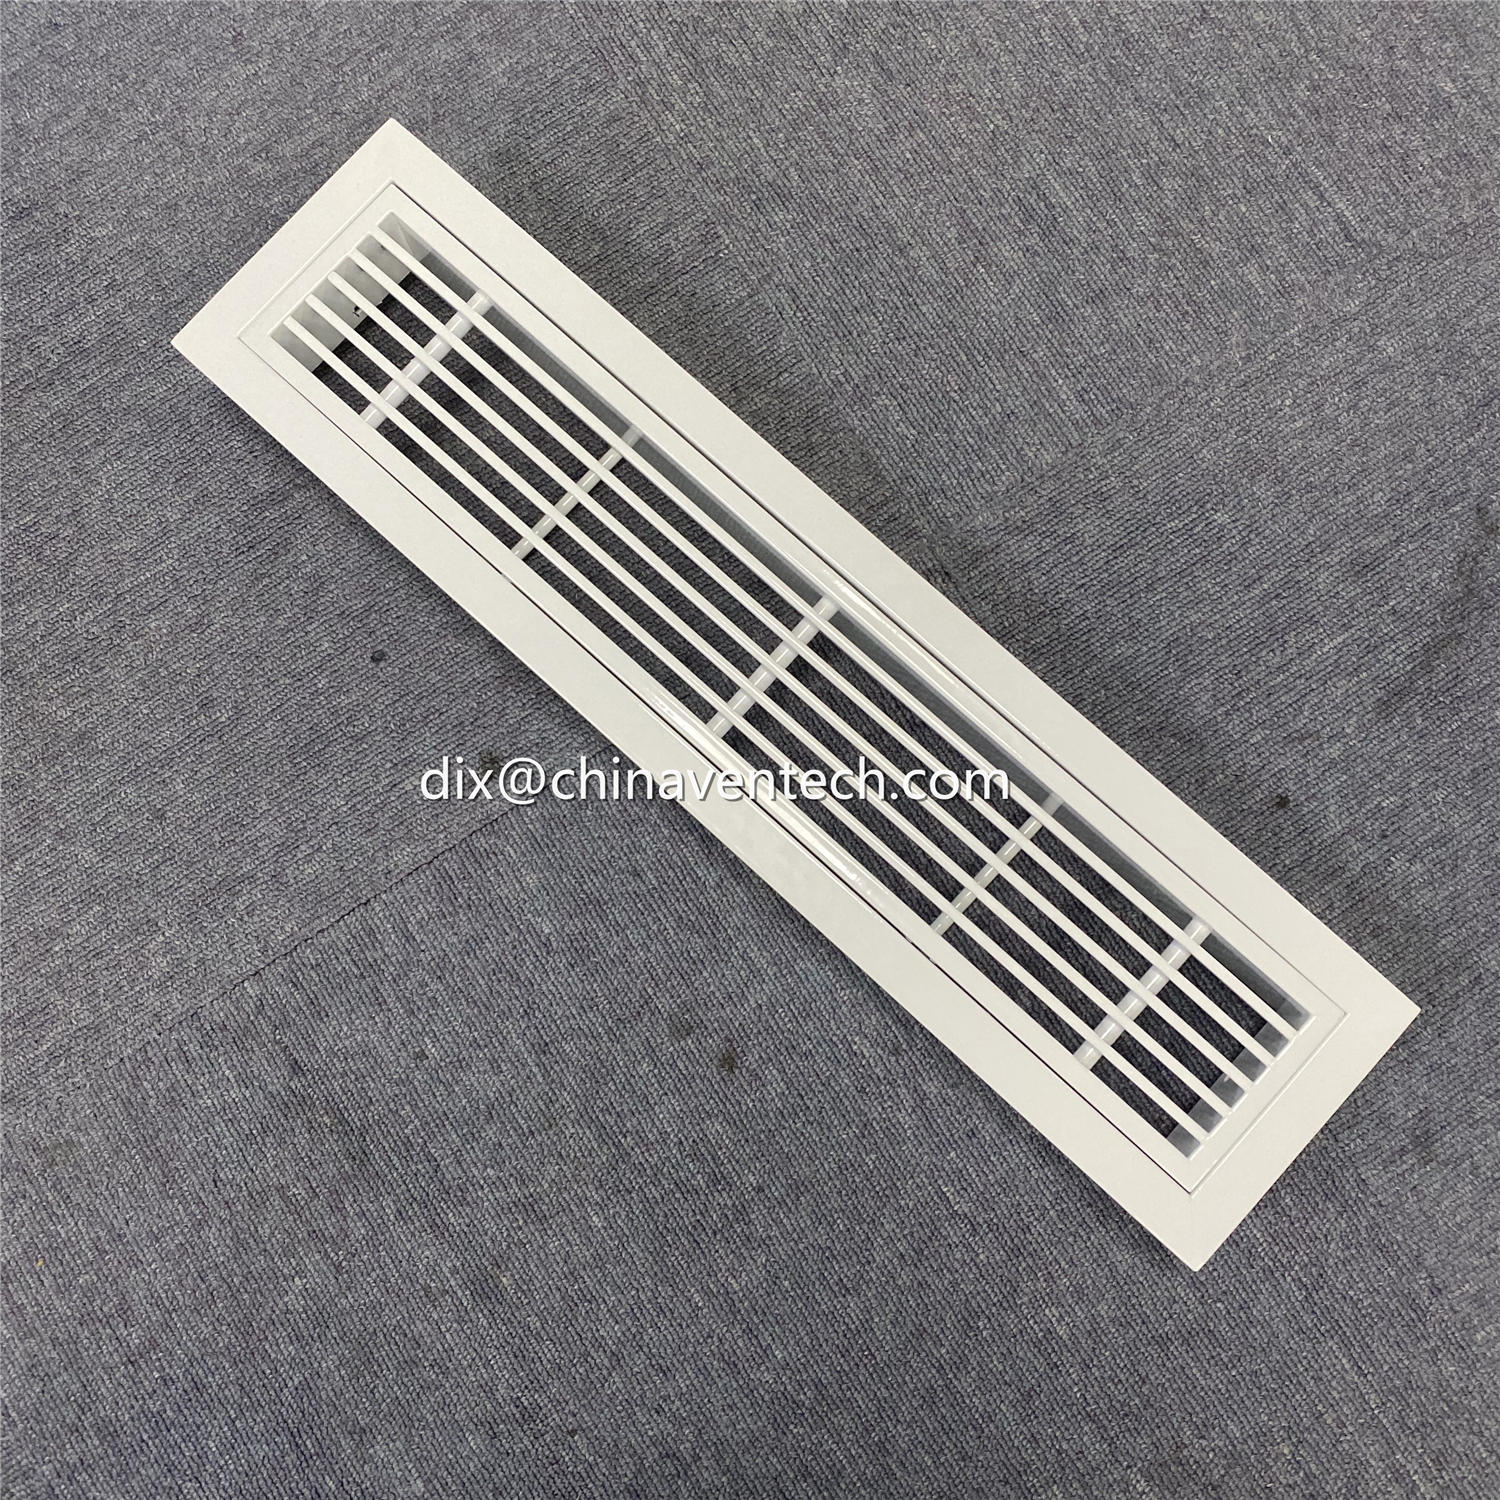 Hvac Architectural Sidewall Bar Grilles & Registers with Removable Core